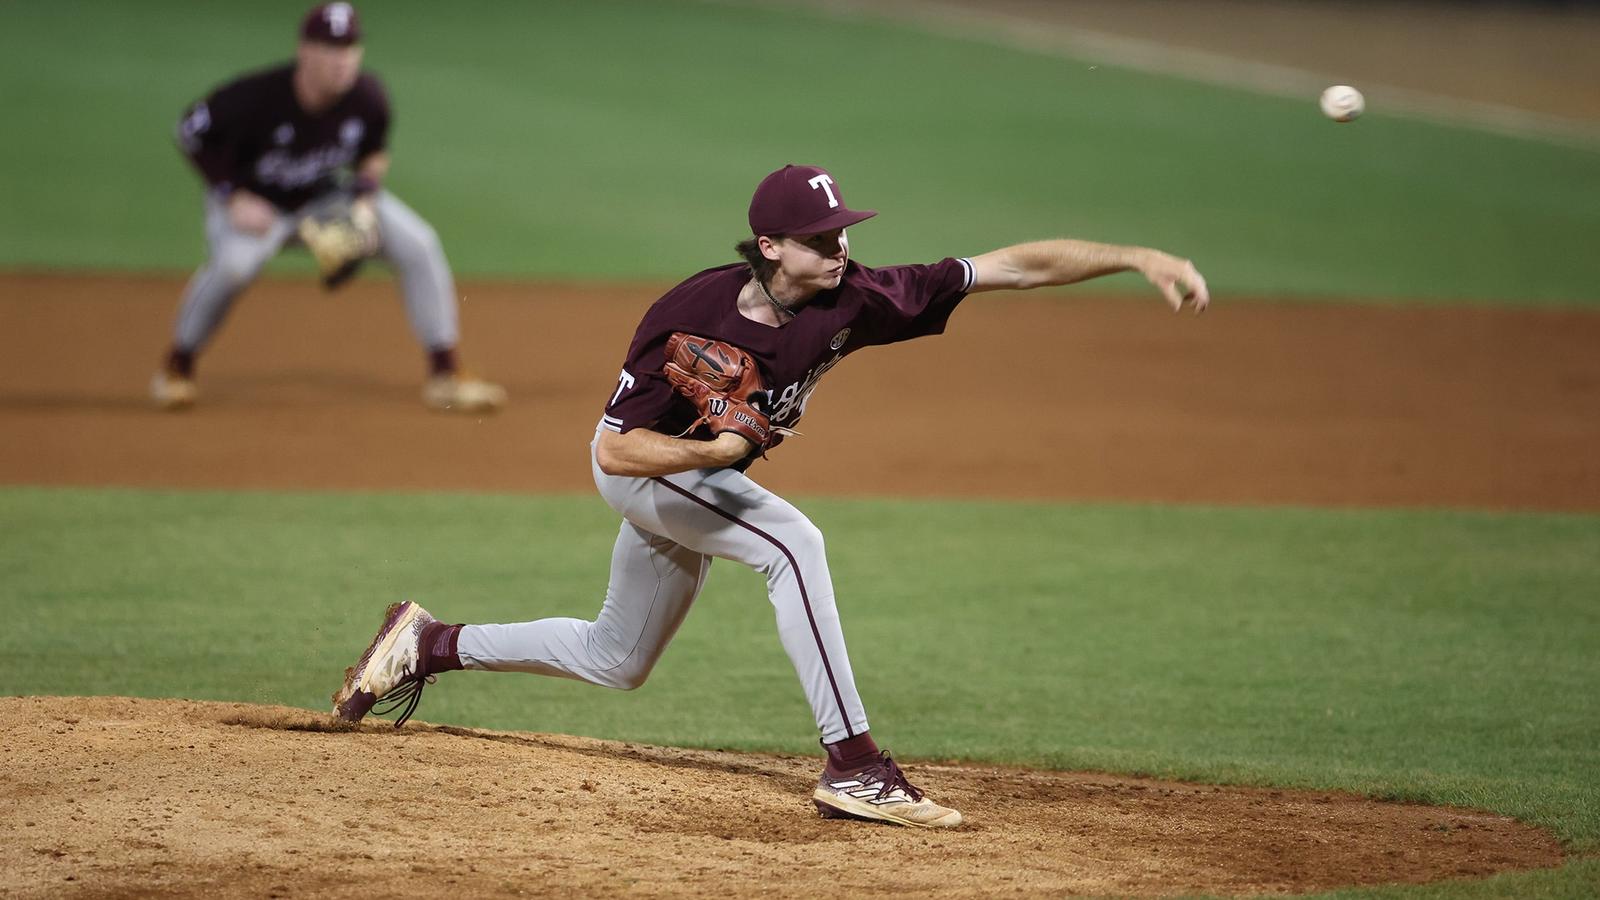 Late Rally Falls Short for No. 1 Aggies